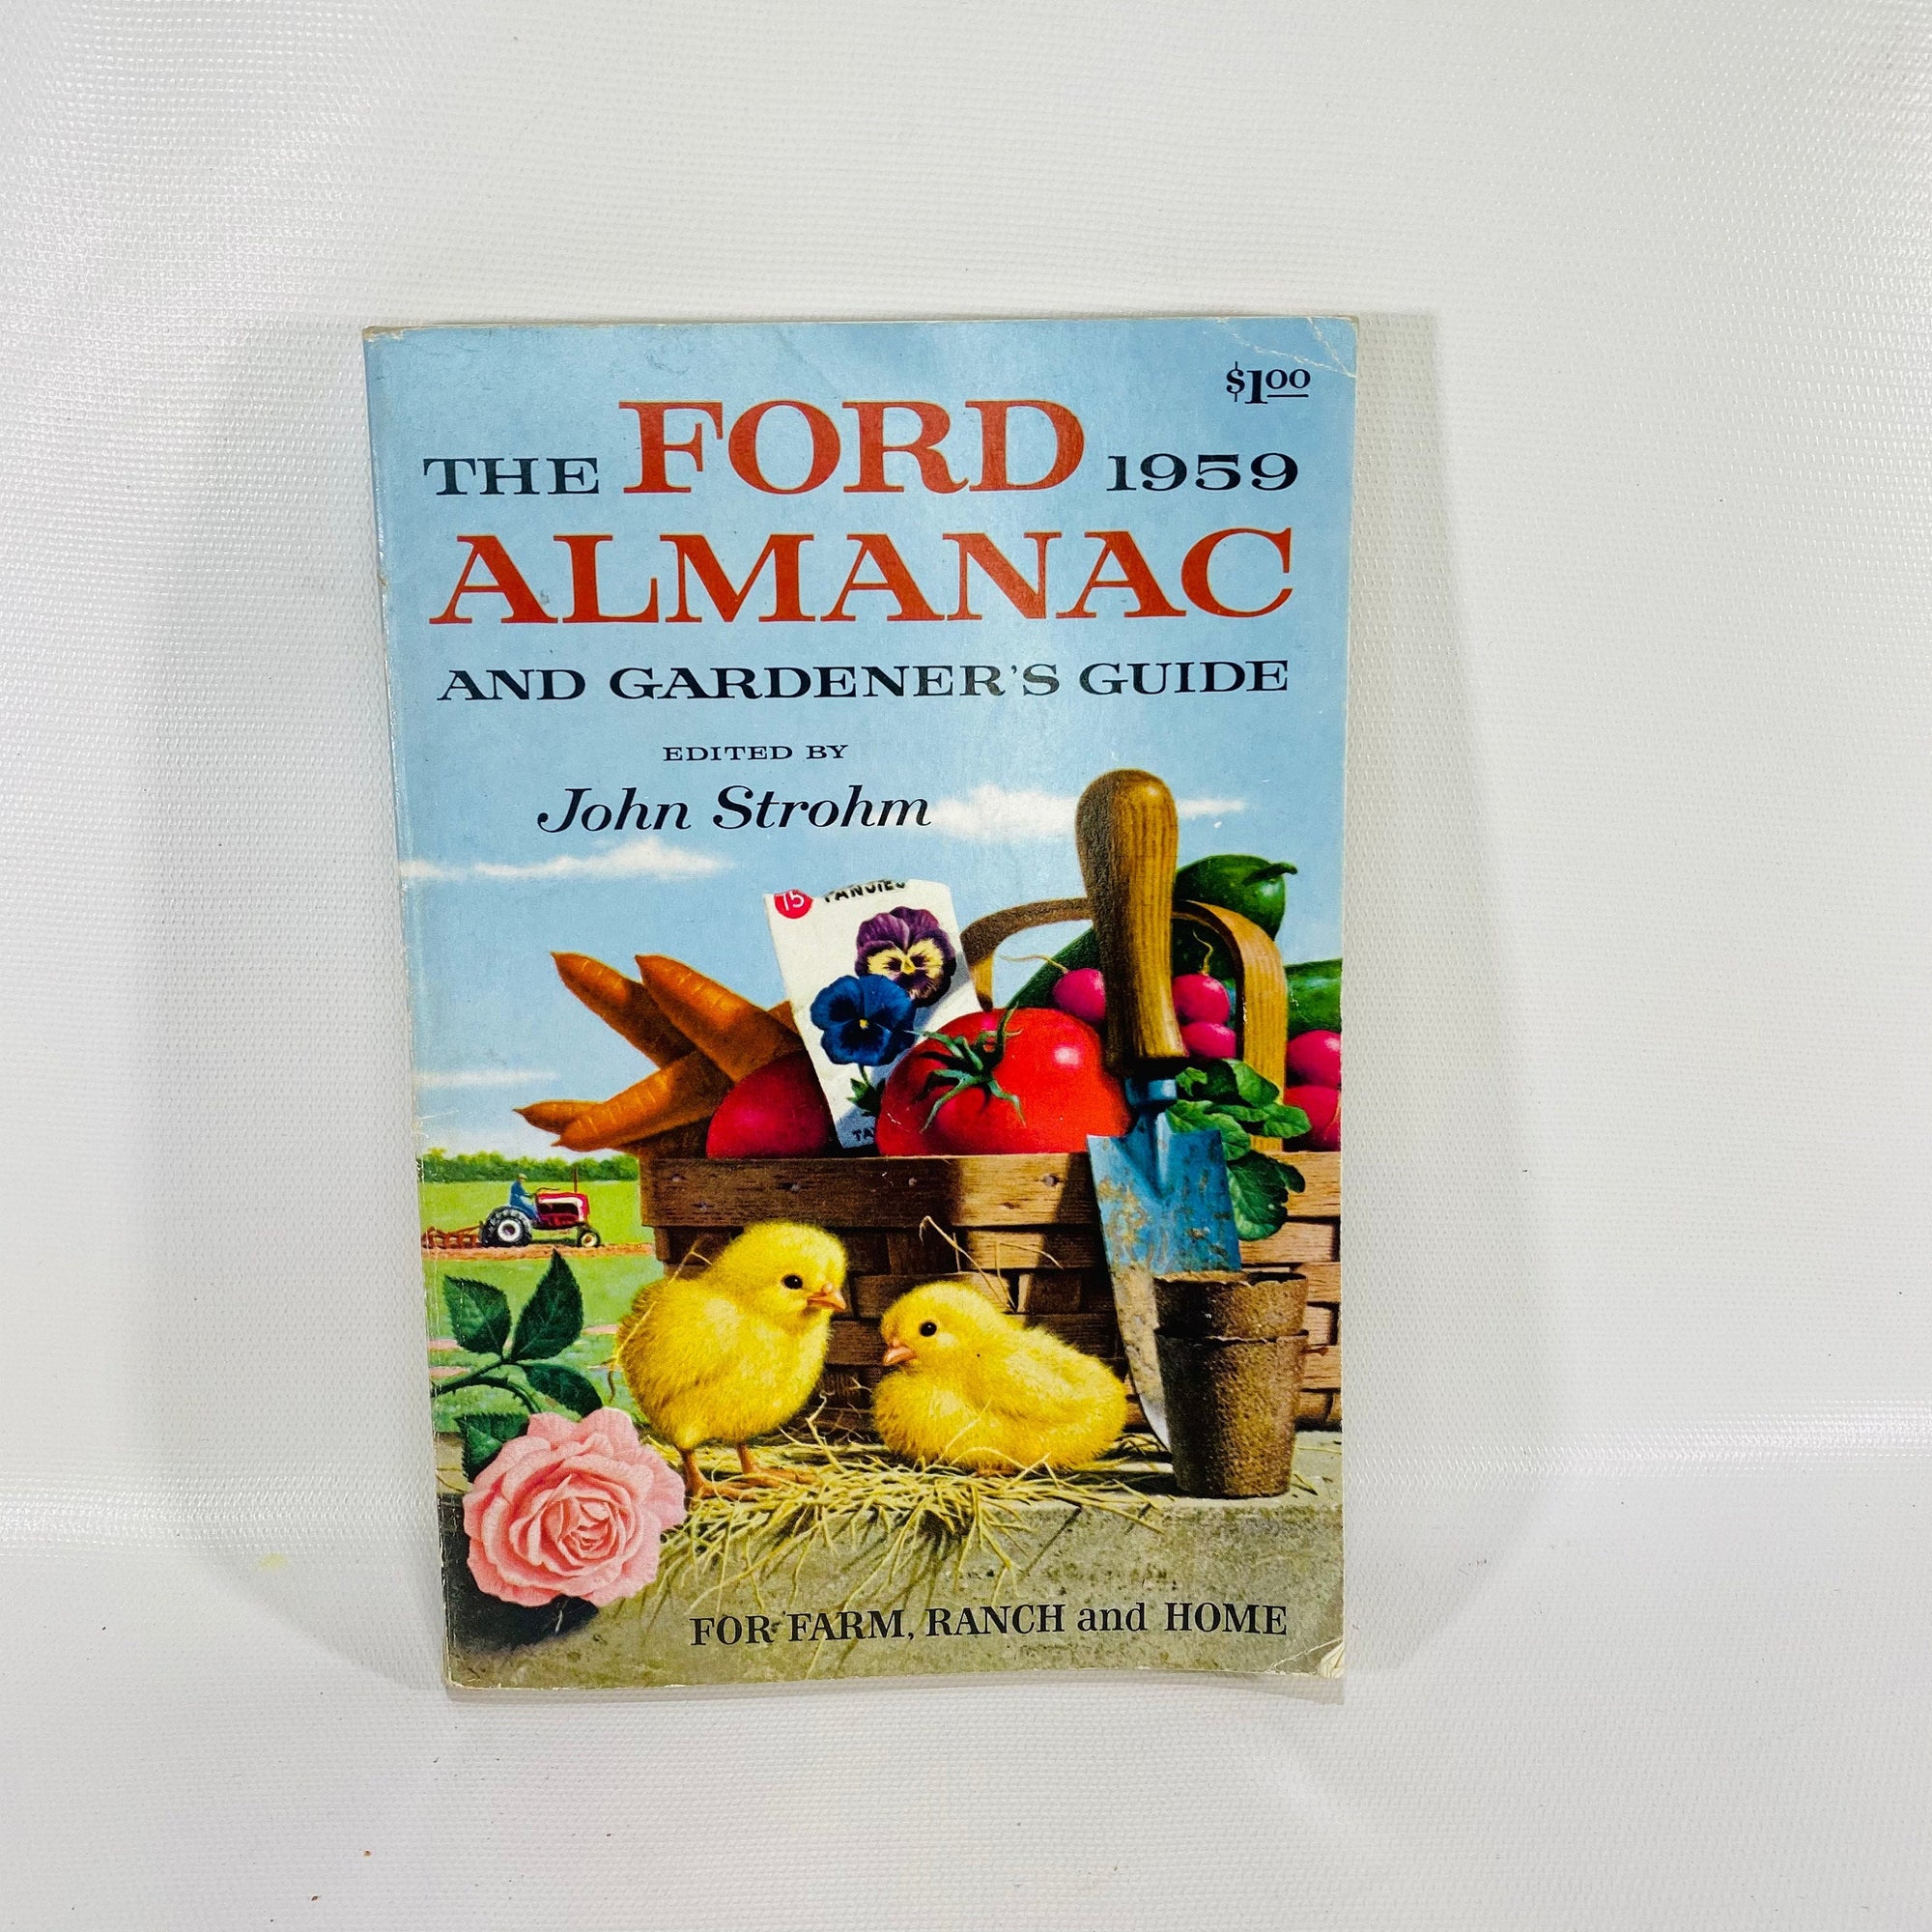 The Ford Almanac and Gardening Guide edited by John Strohm 1959 Simon & Shuster